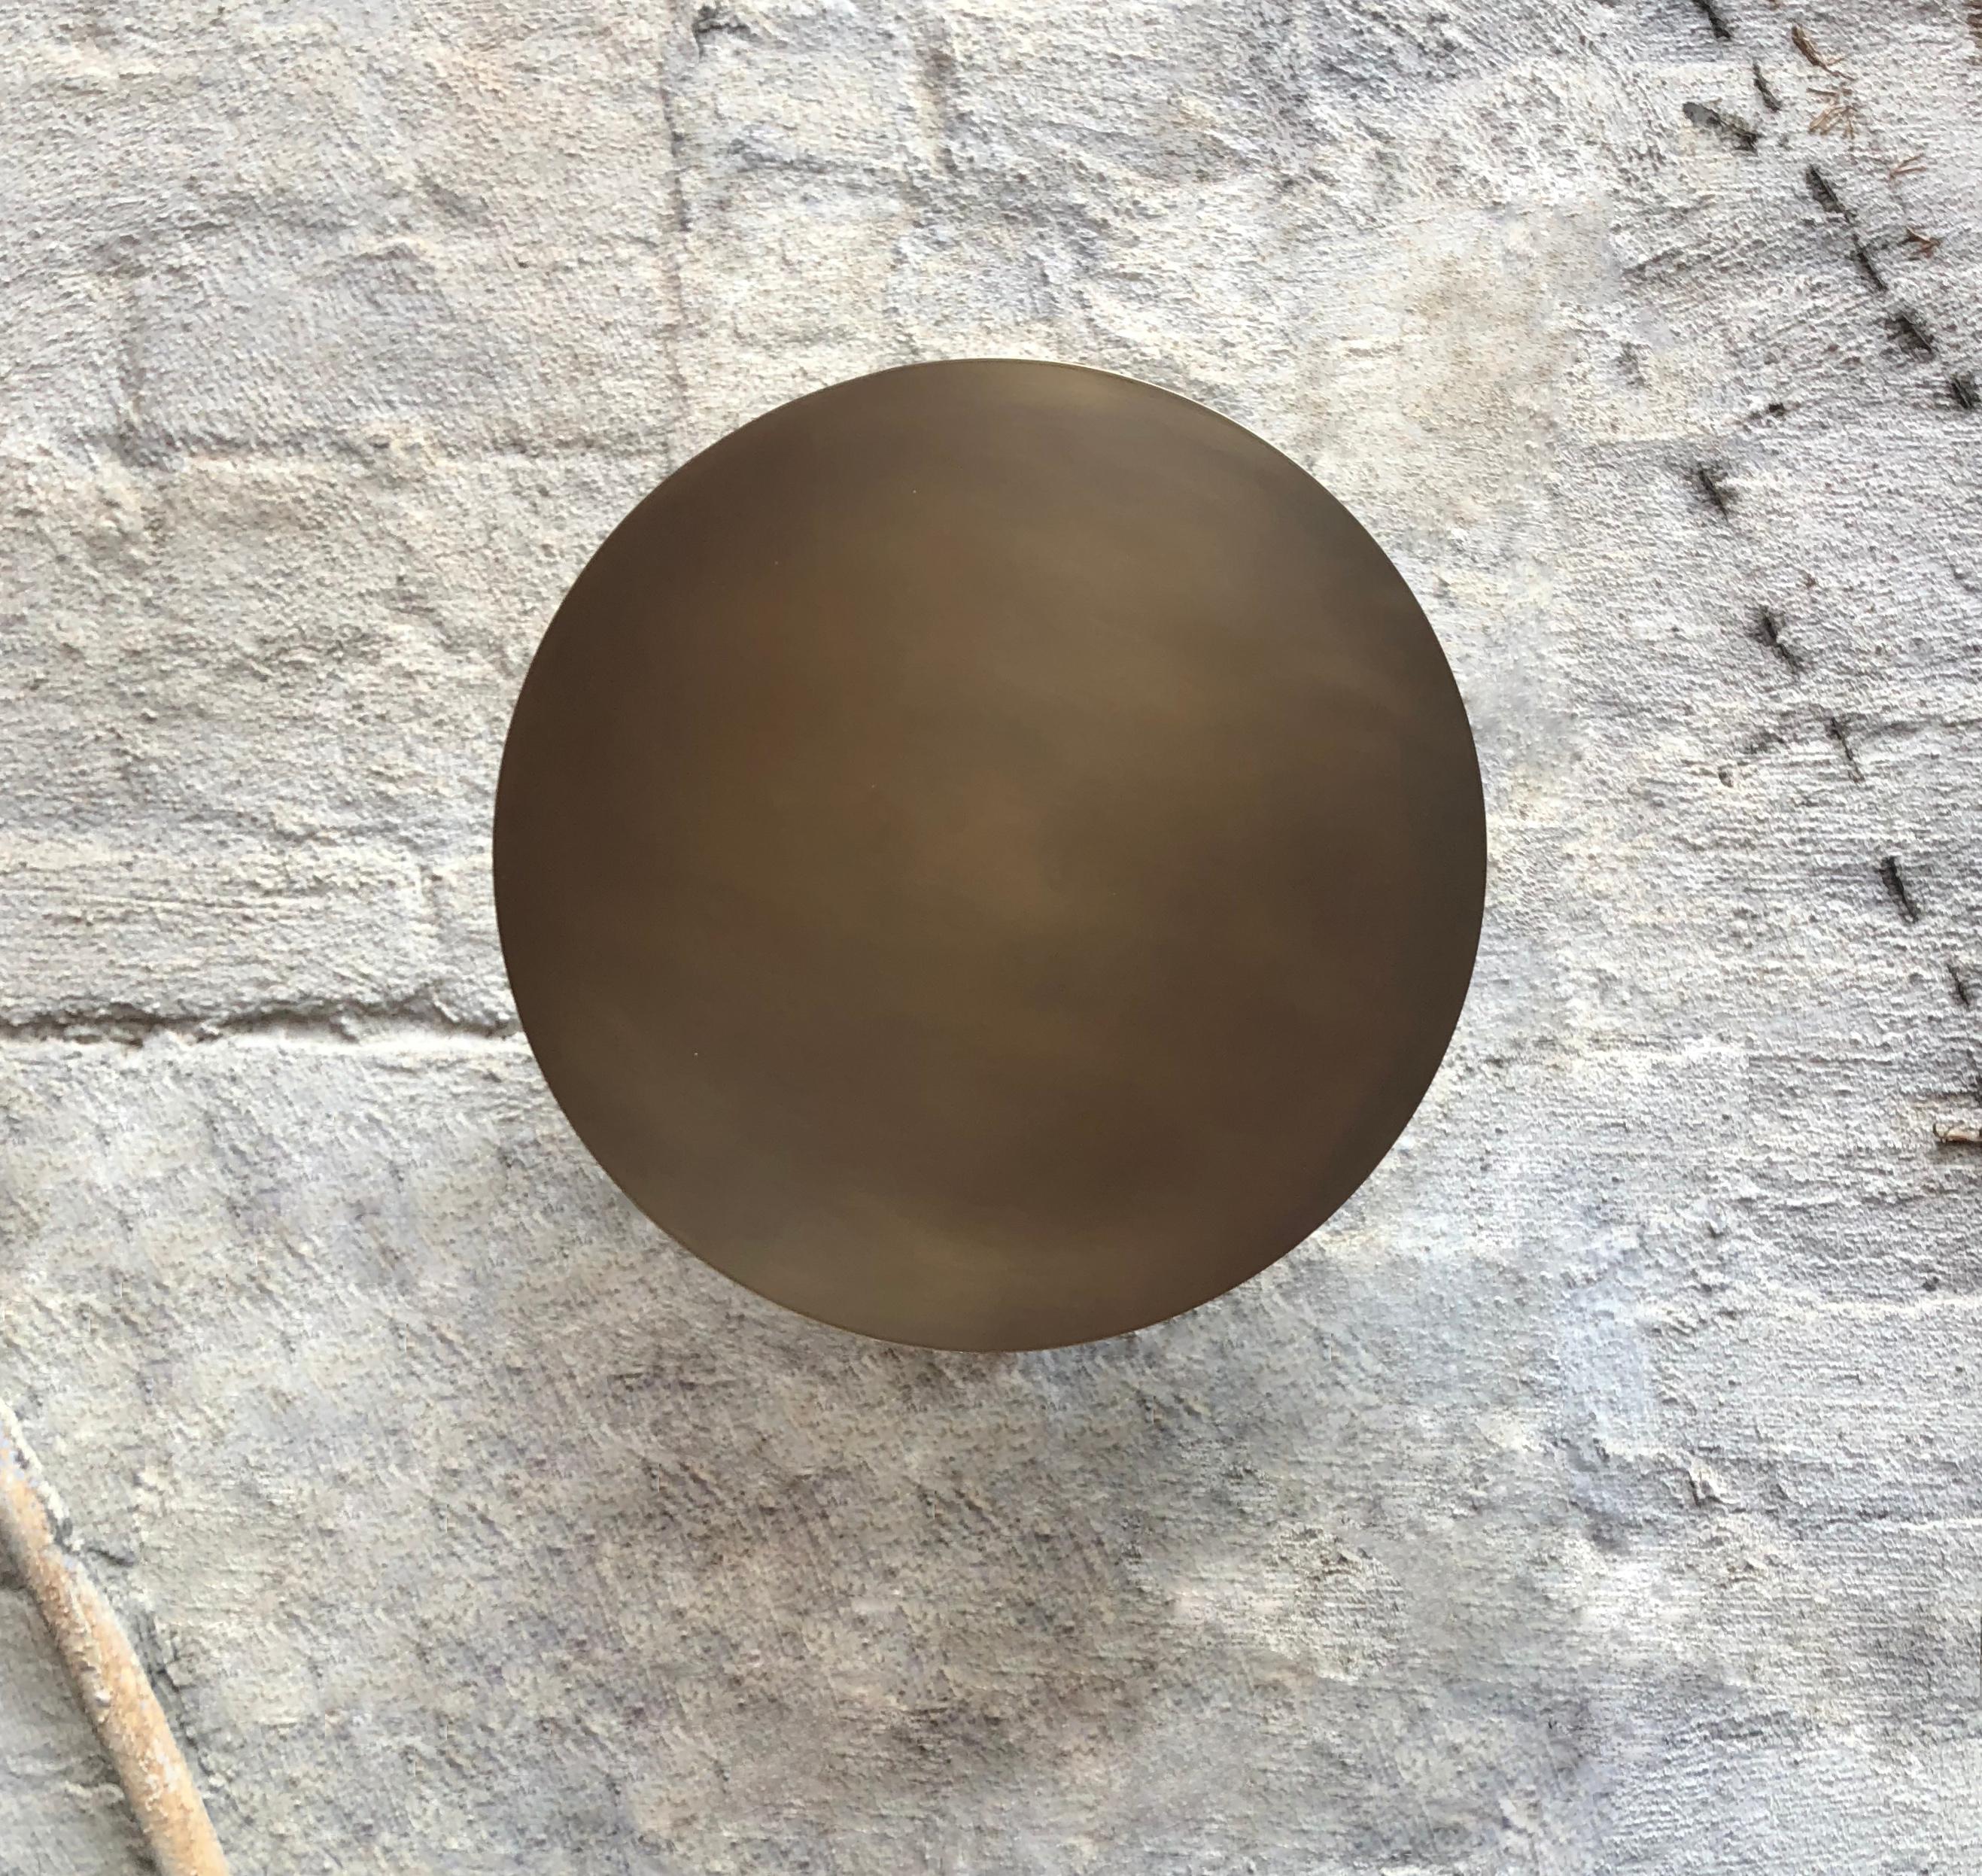 Kurt Versen designed ceiling or wall indoor lights in patinated brass of a sturdy gauge. Each fixture has a round, straight edge shade that is enameled white on the interior side and is affixed onto the white enameled brass cylindrical stem and